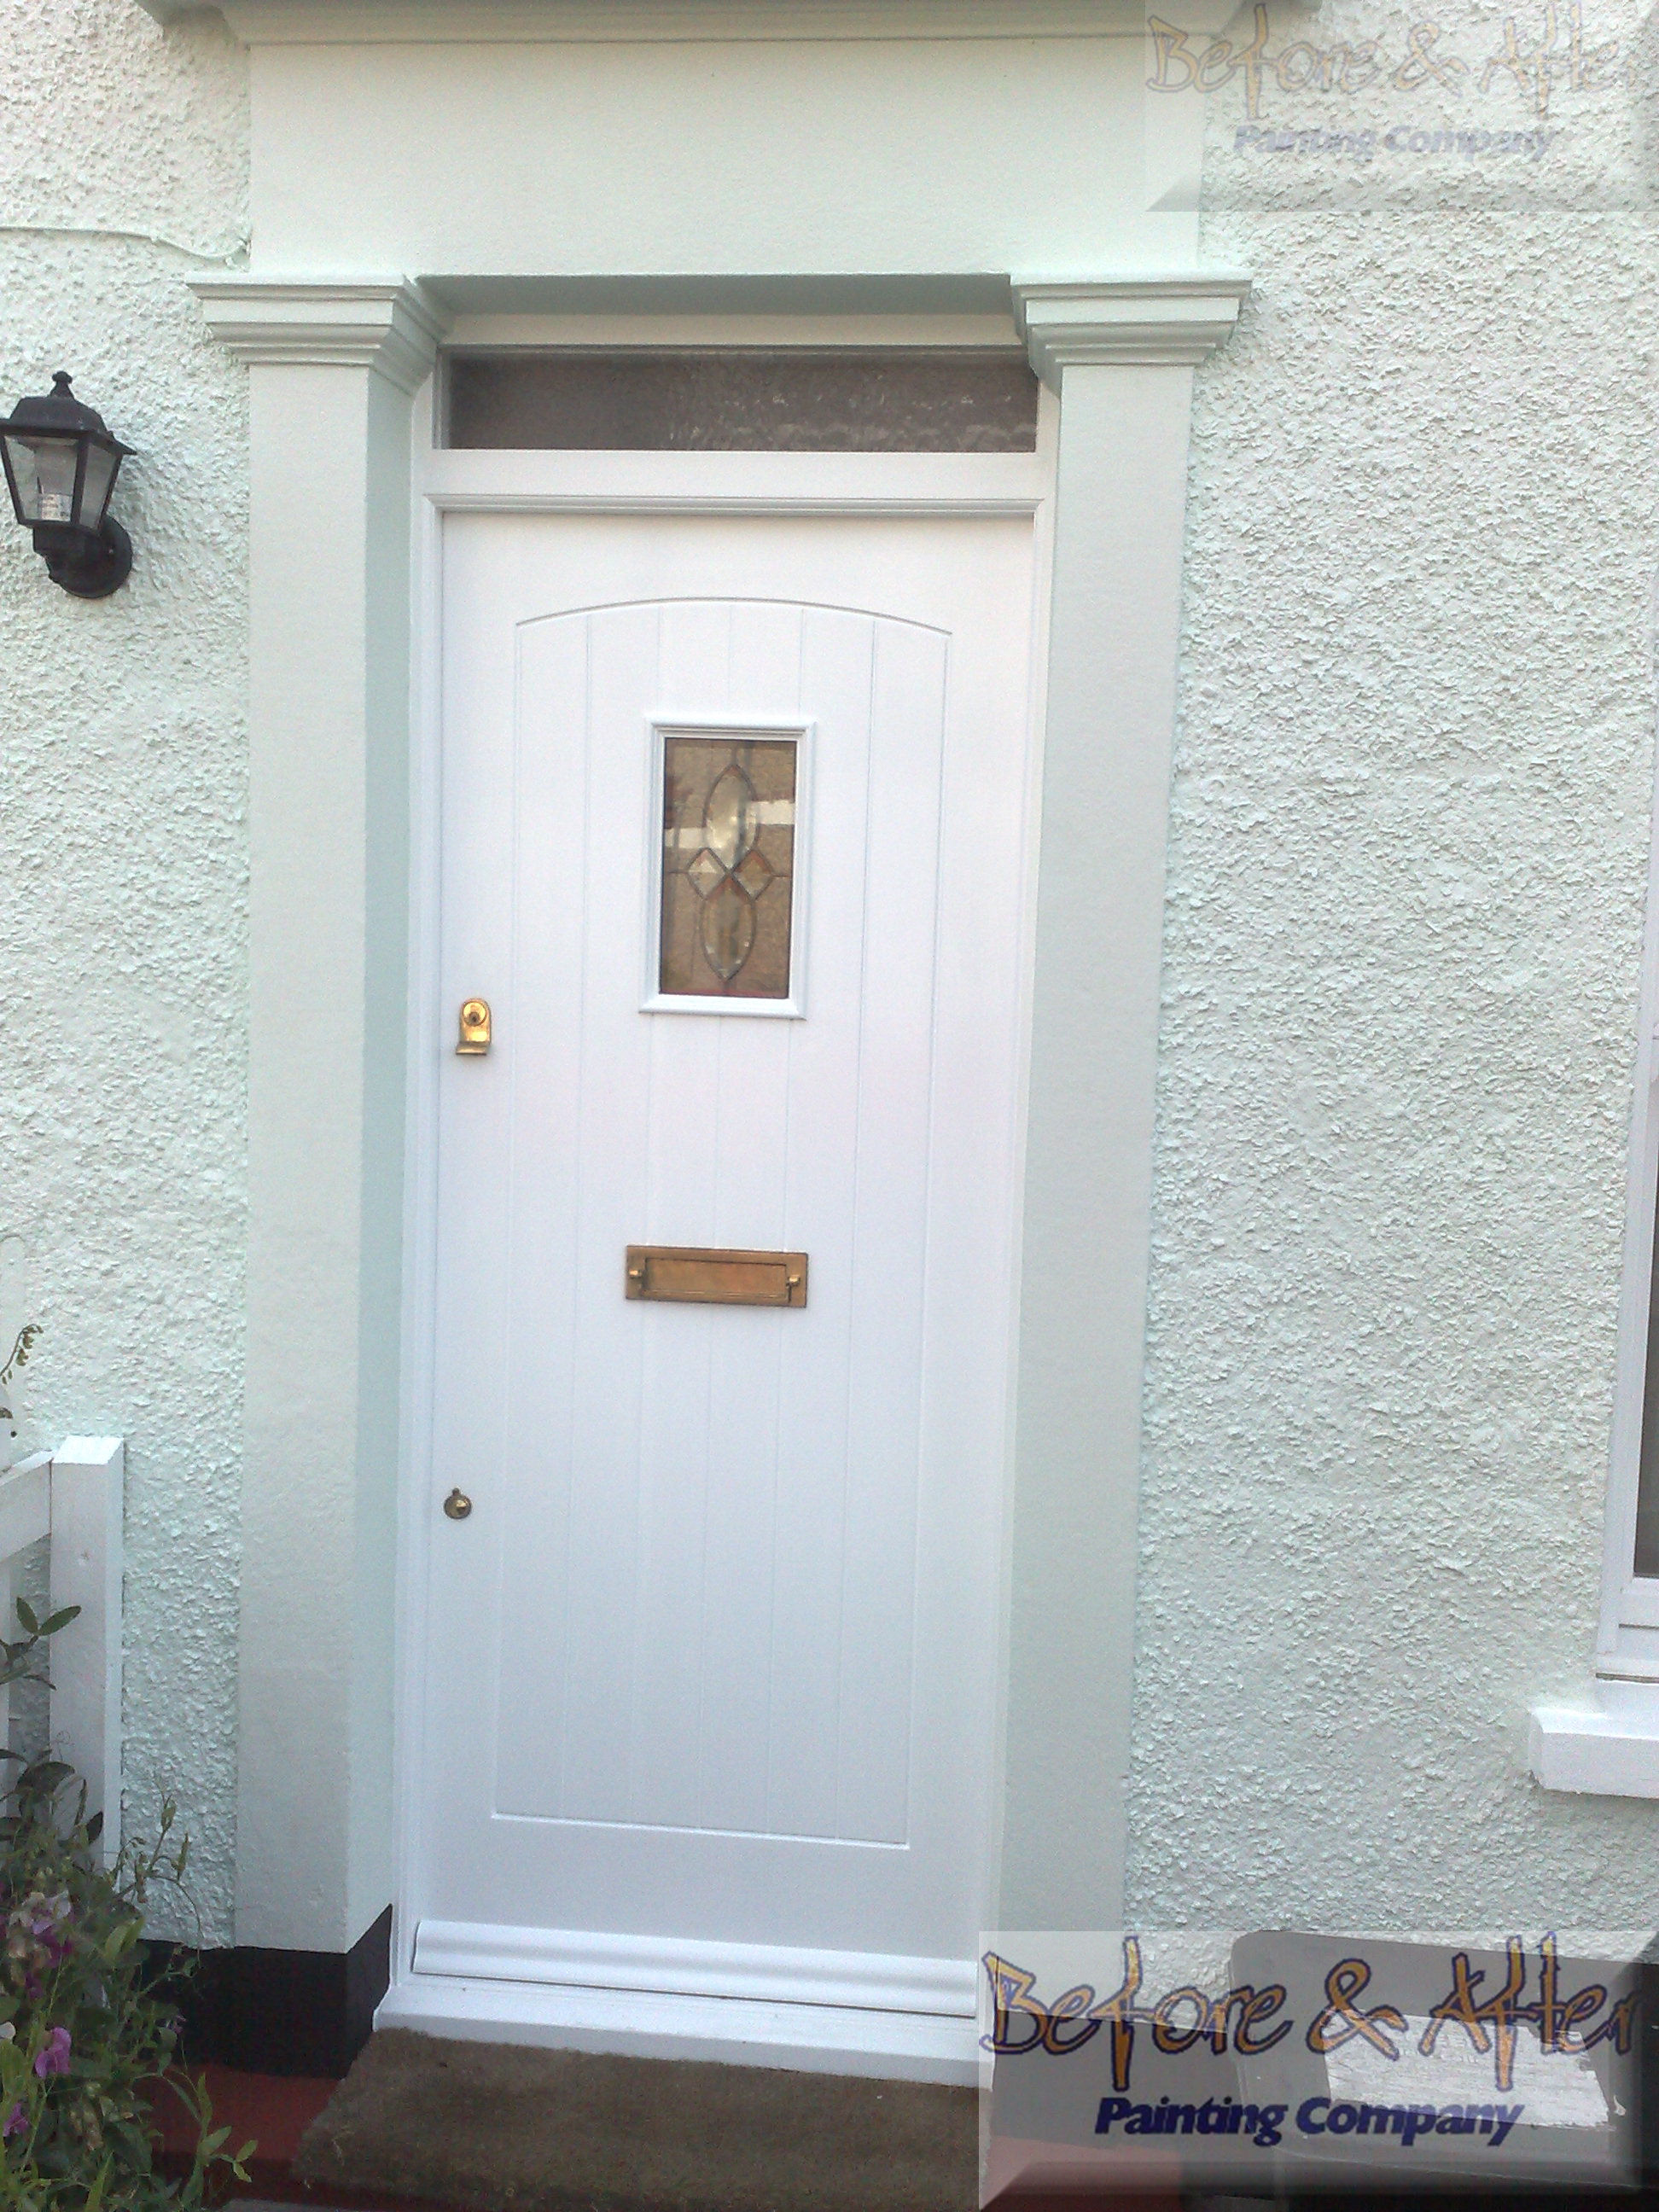 Albany smooth masonry paint - Seafoam. Front door - Sandtex flexi-gloss in brilliant white.